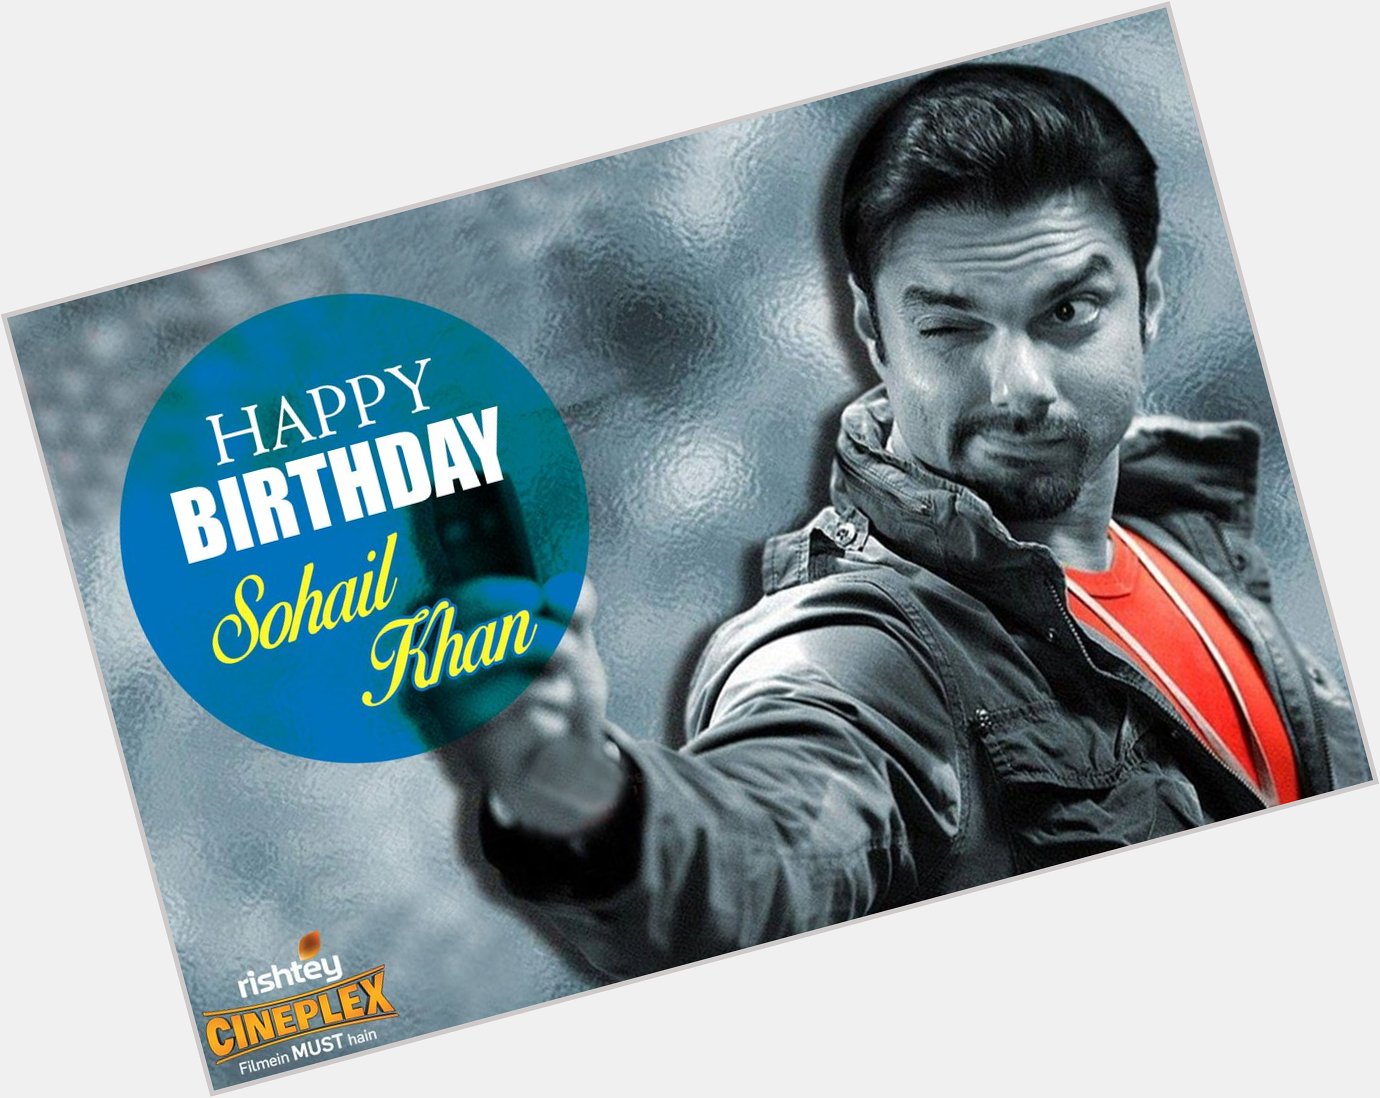 Wishing Sohail Khan a very happy birthday! Send in your wishes below.  